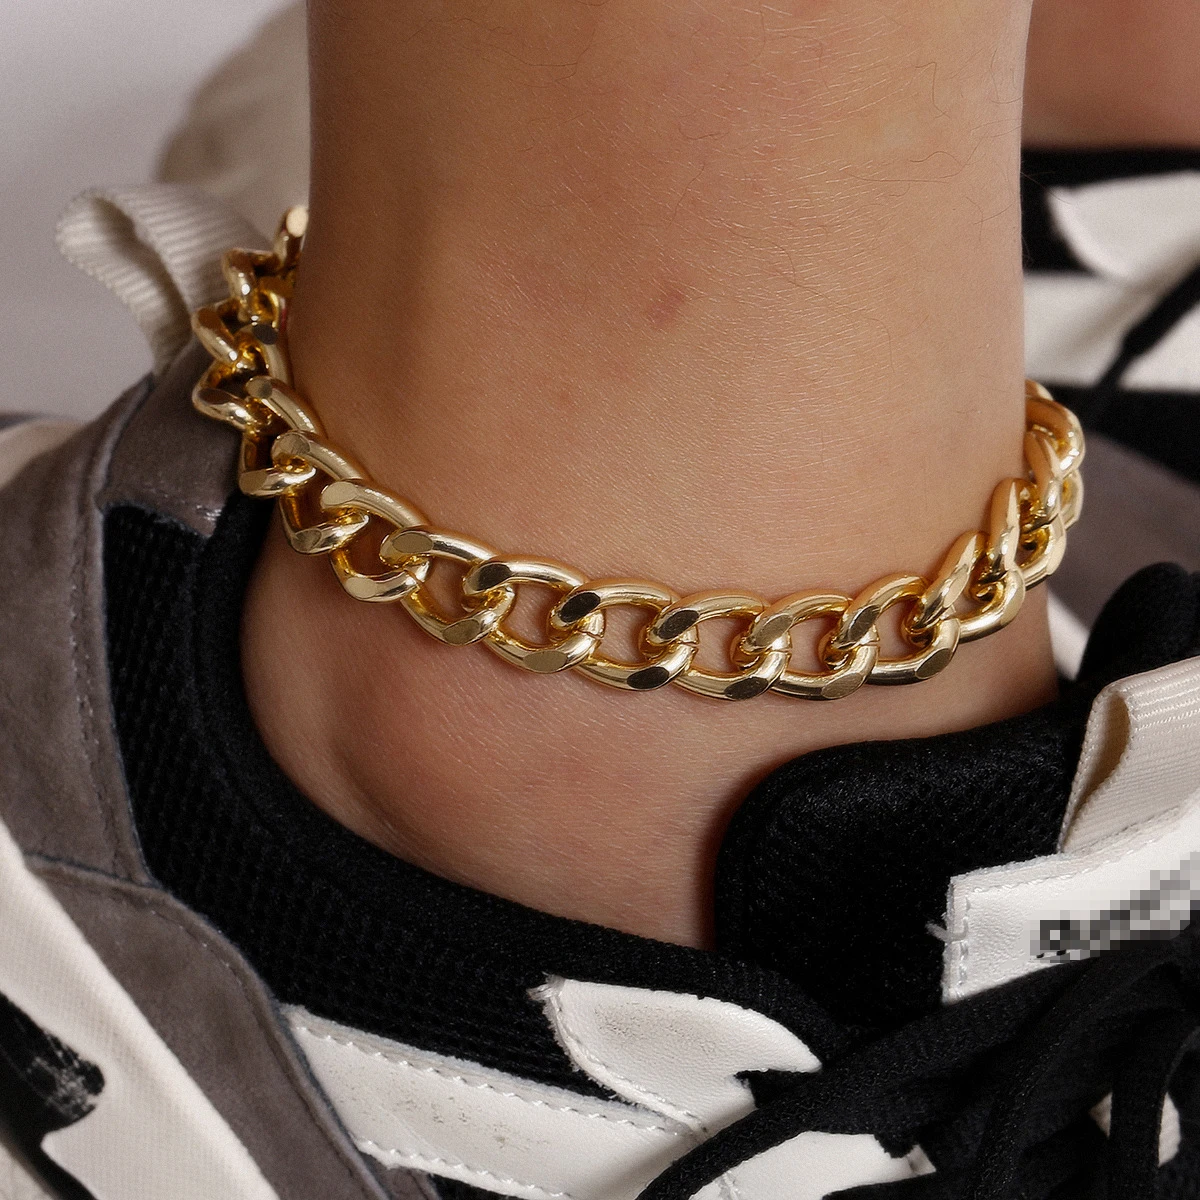 

Barlaycs 2021 Fashion Designer Anklet 18K Gold Plated Cuban Link Anklet Beach Anklets Feet Chain Jewelry Gold Stainless Steel